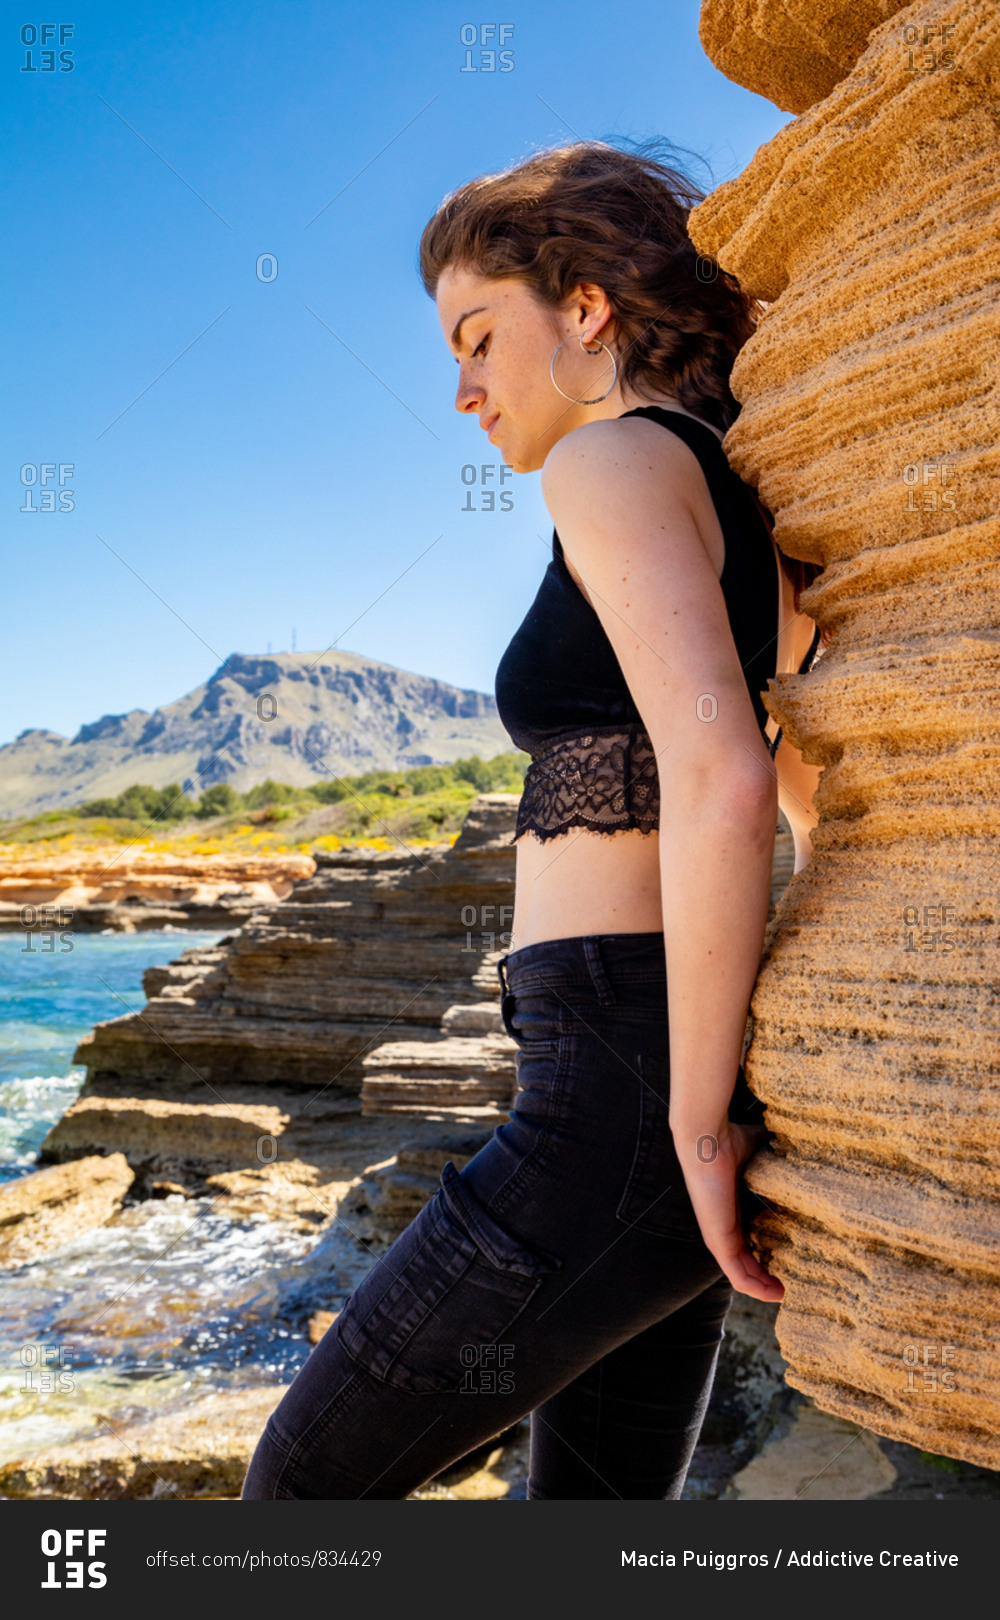 Side view of slim woman in black crop top and jeans standing in canyon and enjoying landscape